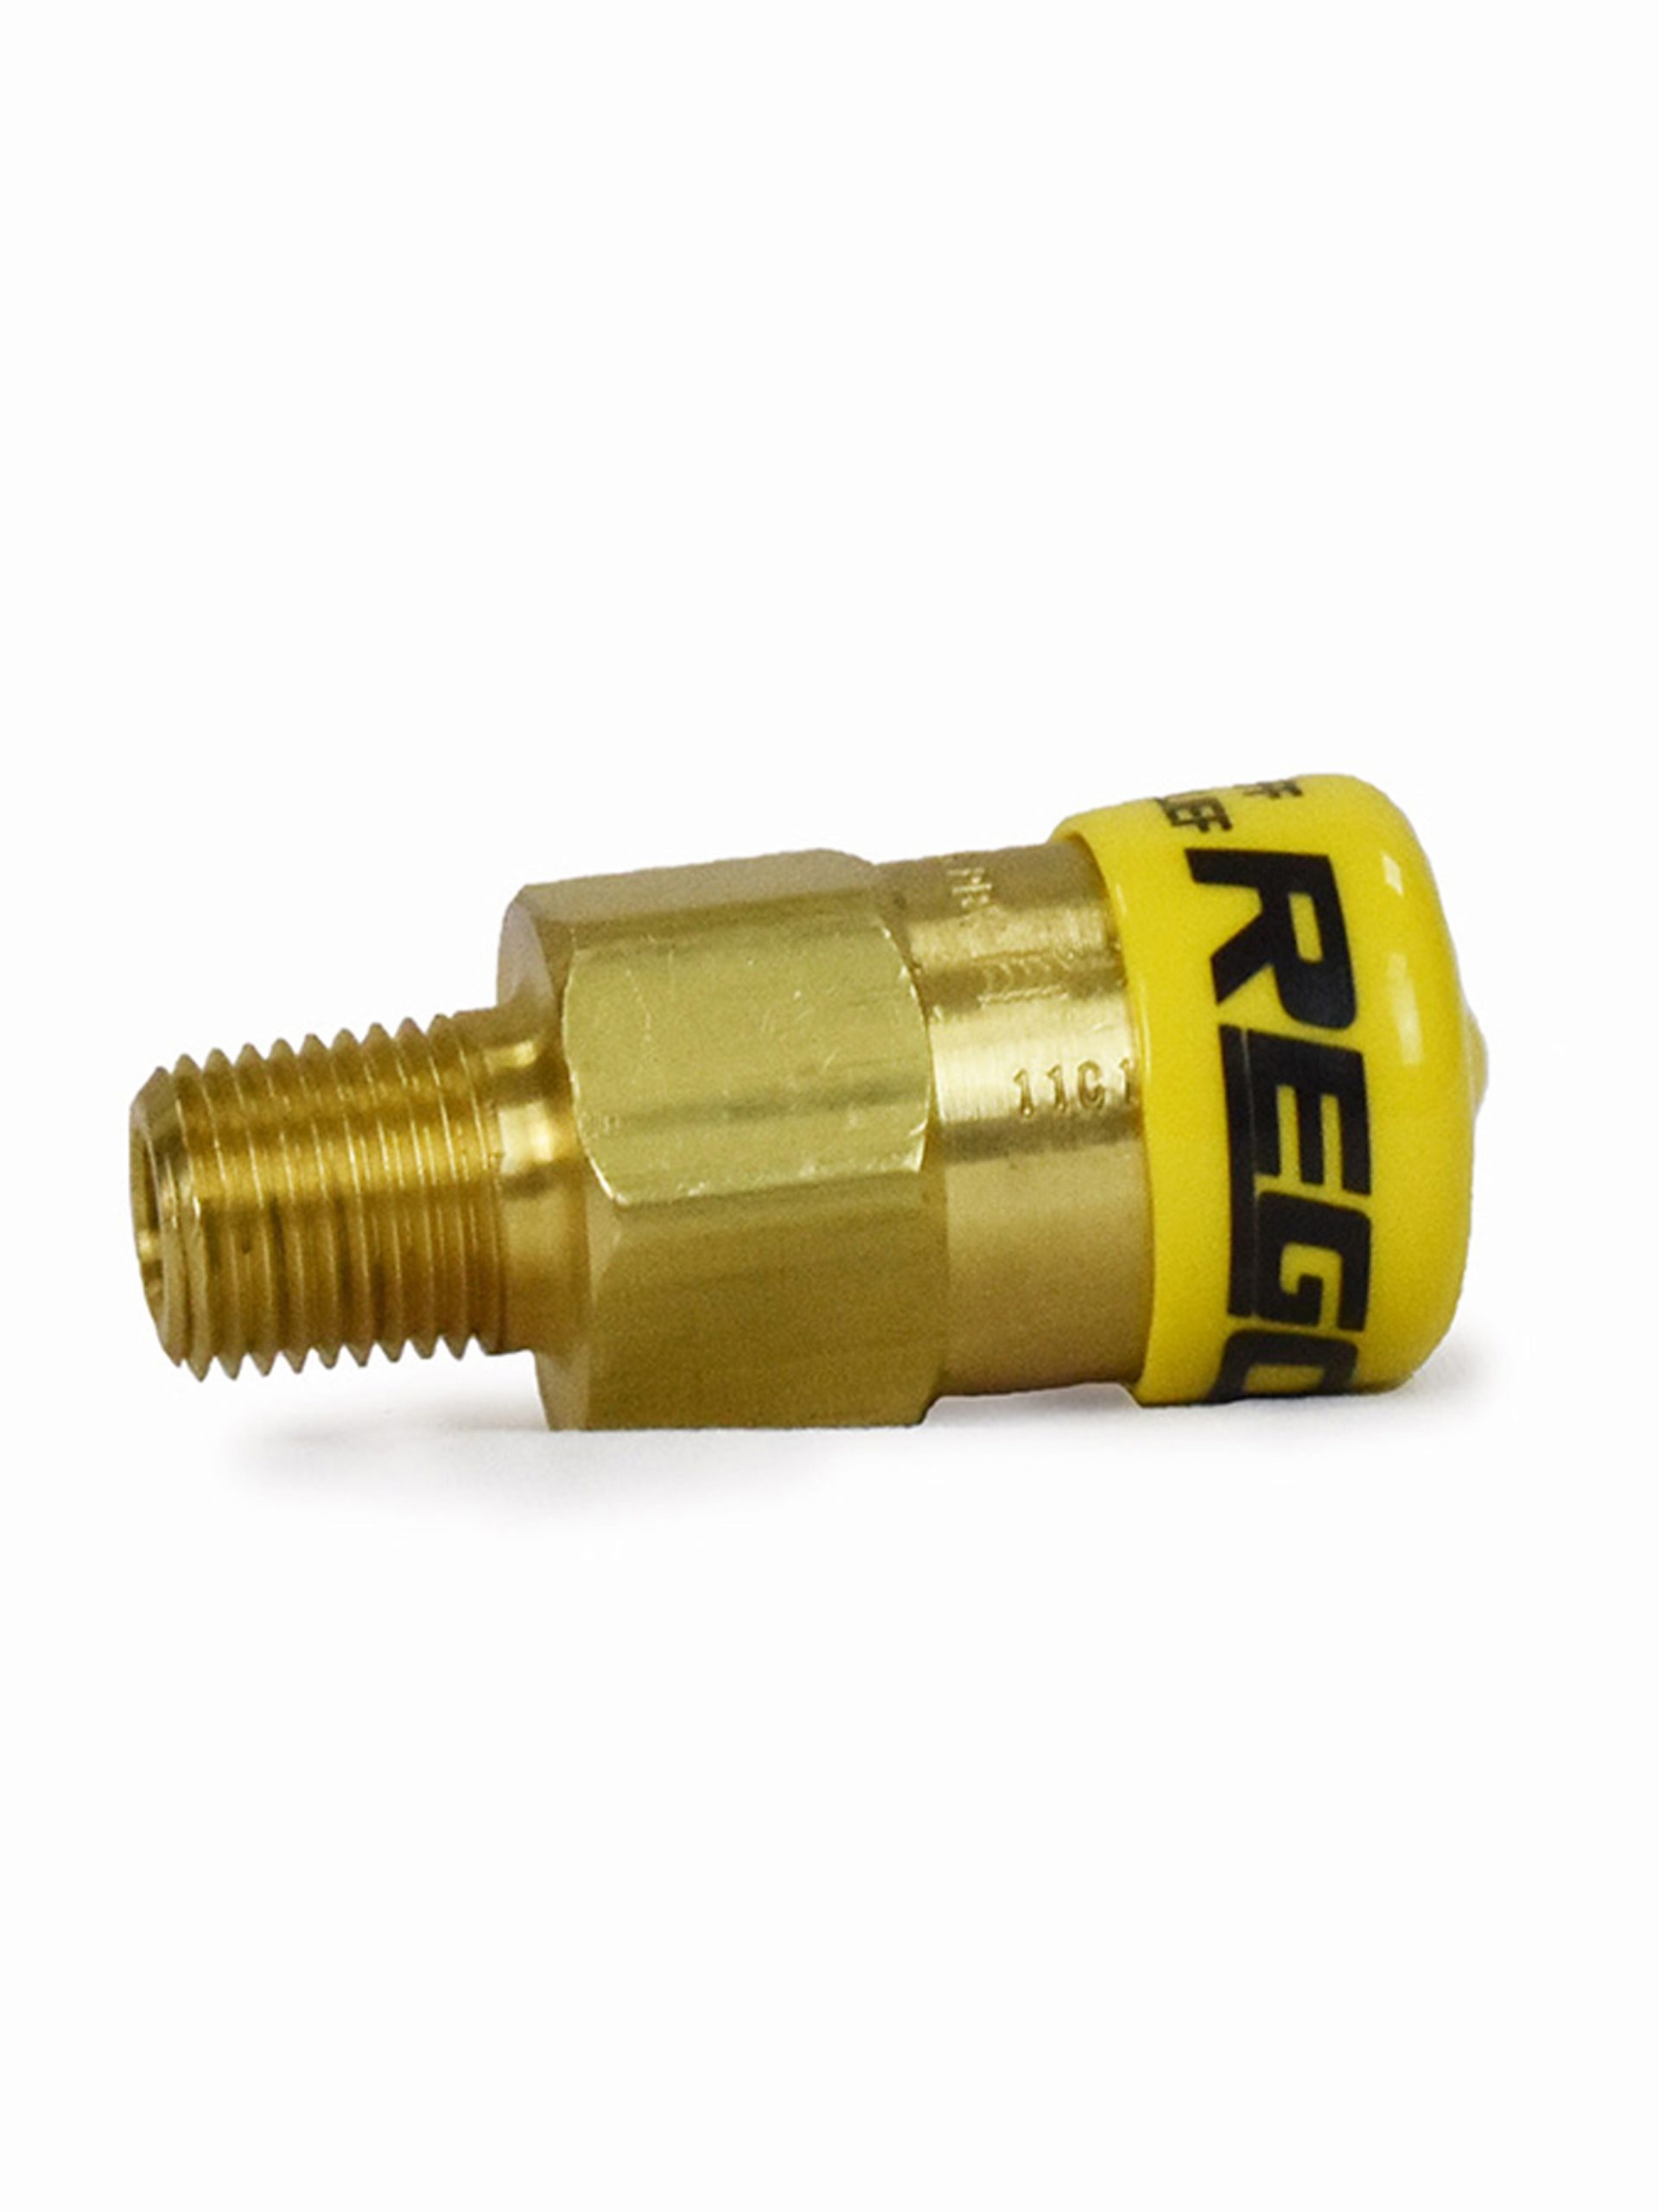 SAFETY RELIEF VALVE 1/4 Inches 18.96 BAR